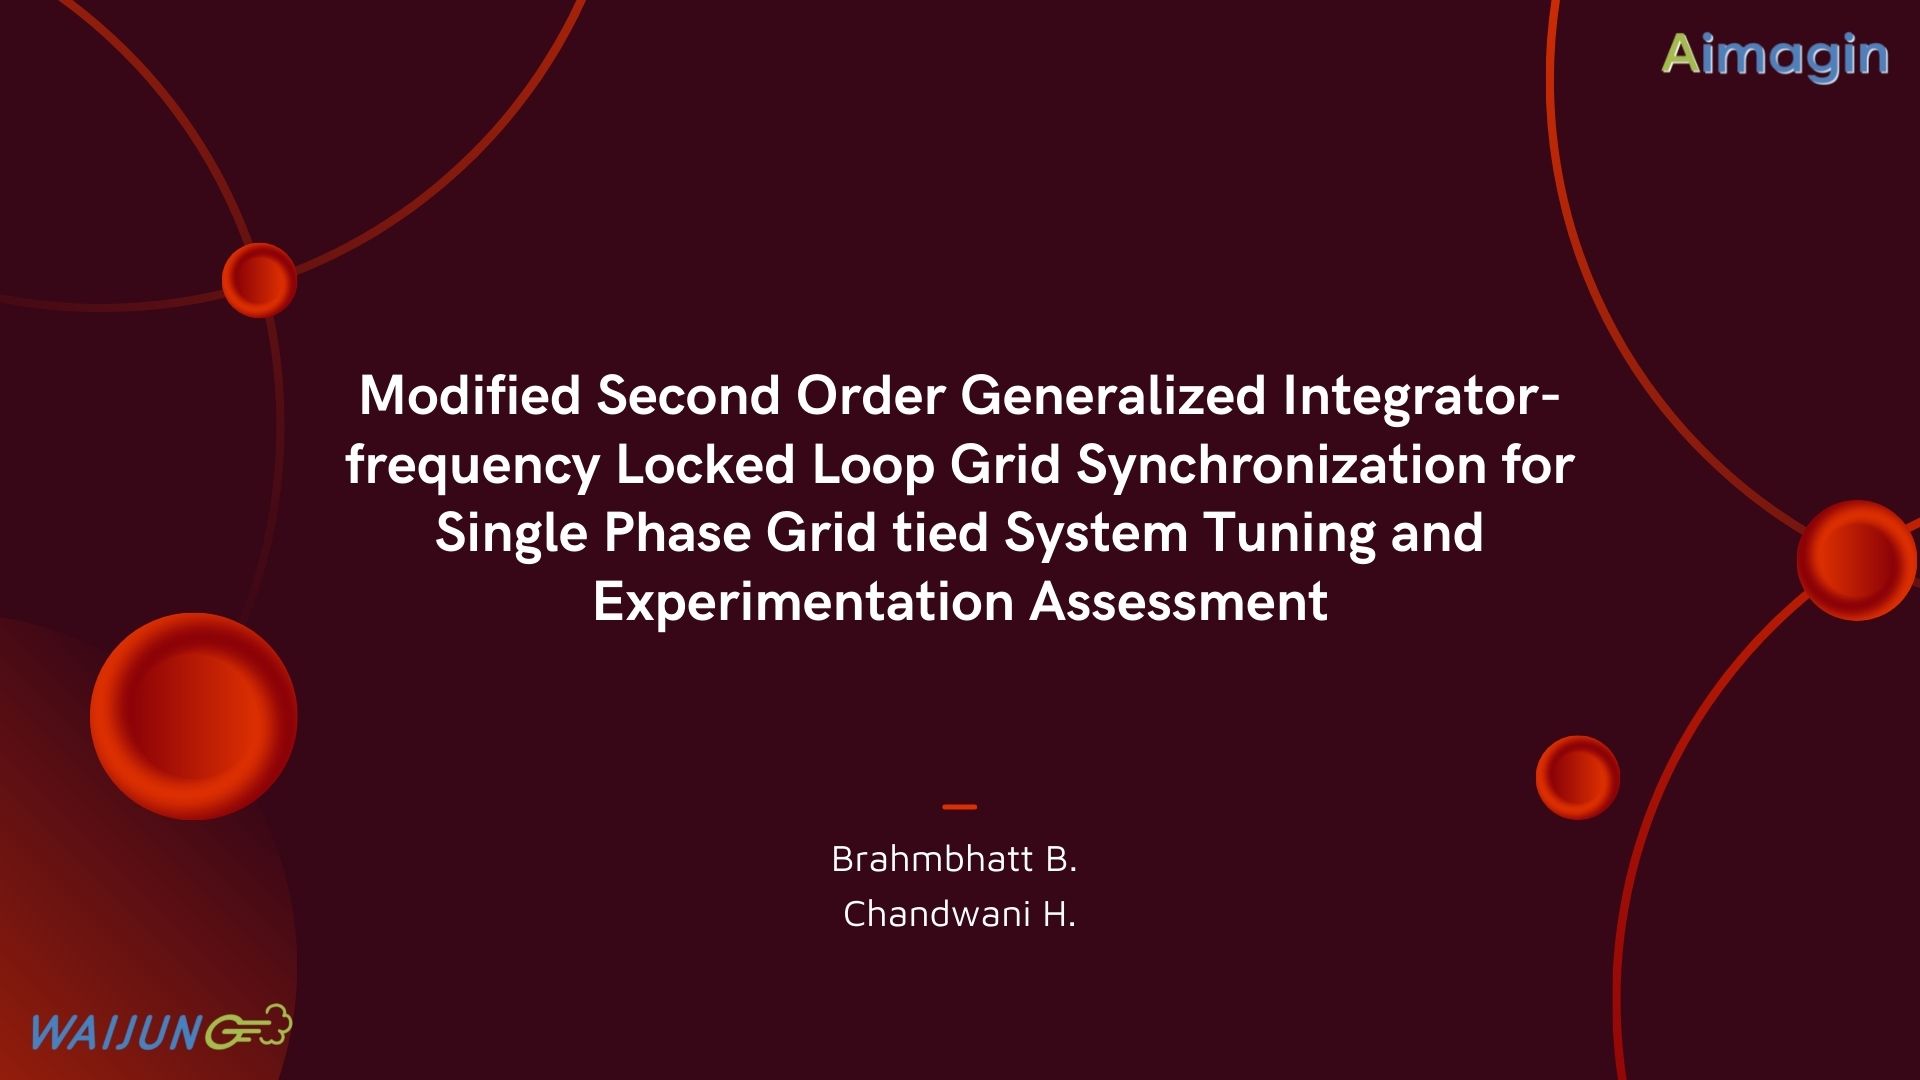 Modified Second Order Generalized Integrator-frequency Locked Loop Grid Synchronization for Single Phase Grid tied System Tuning and Experimentation Assessment